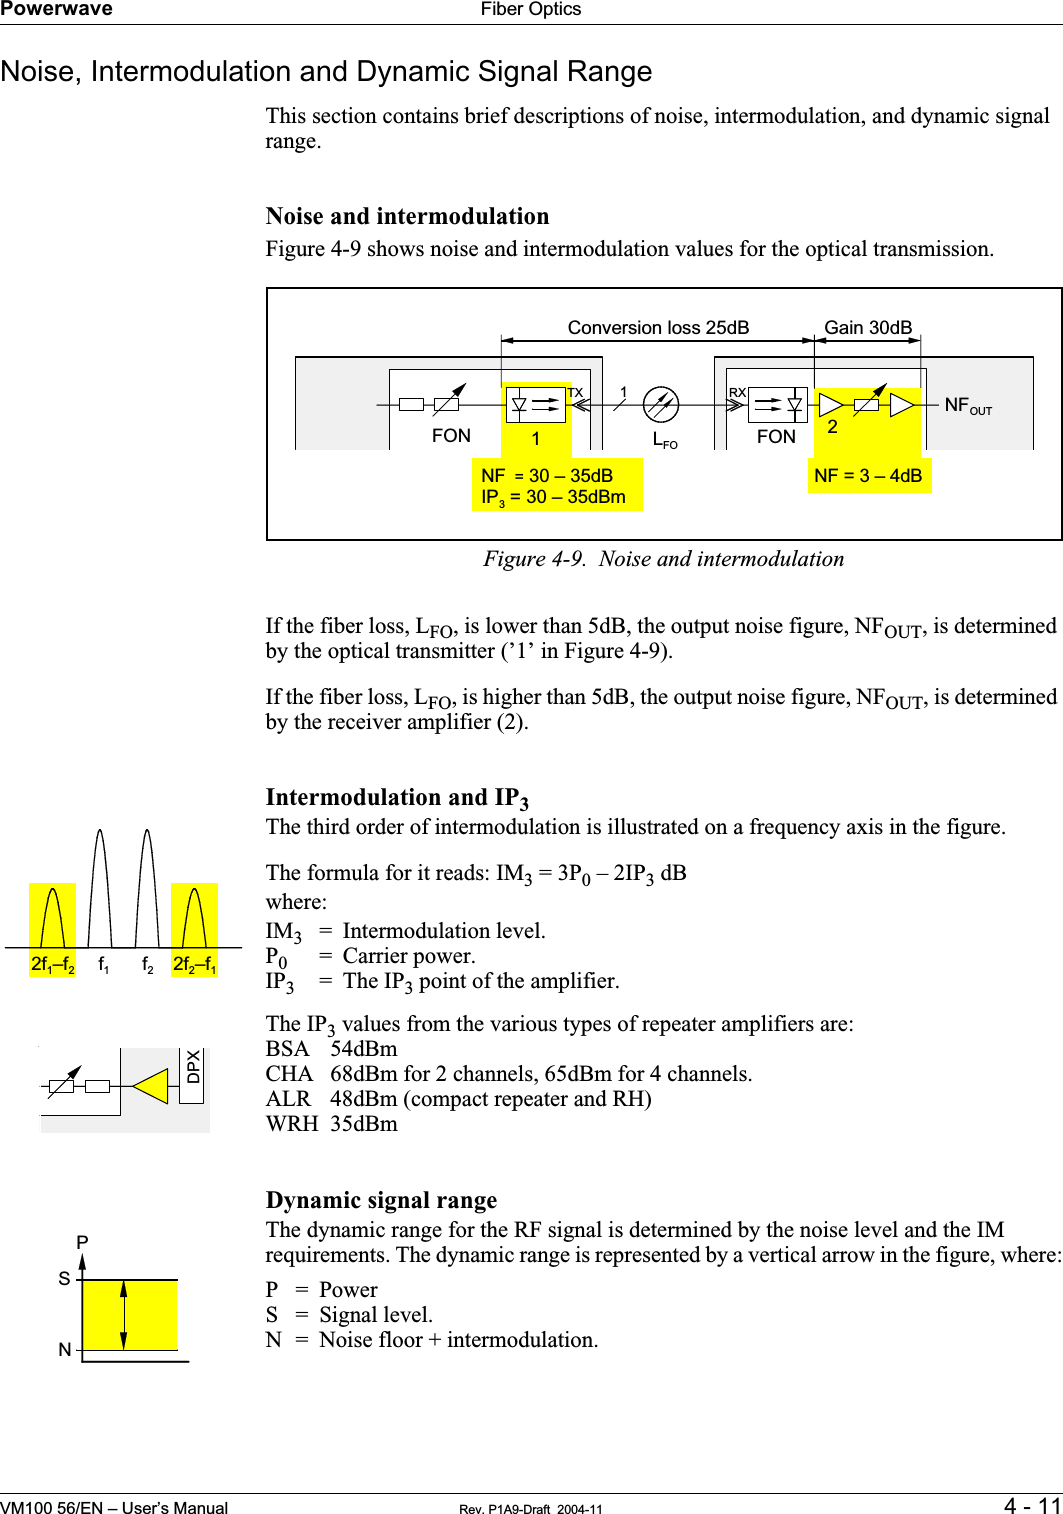 Powerwave Fiber OpticsVM100 56/EN – User’s Manual Rev. P1A9-Draft  2004-11 4 - 11Noise, Intermodulation and Dynamic Signal RangeThis section contains brief descriptions of noise, intermodulation, and dynamic signal range.Noise and intermodulationFigure 4-9 shows noise and intermodulation values for the optical transmission.Figure 4-9.  Noise and intermodulationIf the fiber loss, LFO, is lower than 5dB, the output noise figure, NFOUT, is determined by the optical transmitter (’1’ in Figure 4-9).If the fiber loss, LFO, is higher than 5dB, the output noise figure, NFOUT, is determined by the receiver amplifier (2).Intermodulation and IP3The third order of intermodulation is illustrated on a frequency axis in the figure.The formula for it reads: IM3 = 3P0 – 2IP3 dBwhere:IM3= Intermodulation level.P0= Carrier power.IP3=The IP3 point of the amplifier.The IP3 values from the various types of repeater amplifiers are:BSA 54dBmCHA 68dBm for 2 channels, 65dBm for 4 channels.ALR 48dBm (compact repeater and RH)WRH 35dBmDynamic signal rangeThe dynamic range for the RF signal is determined by the noise level and the IM requirements. The dynamic range is represented by a vertical arrow in the figure, where:P=PowerS=Signal level.N = Noise floor + intermodulation.FON1RXLFO FONNF = 3 – 4dBTXNF  = 30 – 35dBIP3 = 30 – 35dBmNFOUT12Gain 30dBConversion loss 25dB2f1–f2f1f22f2–f1DPXPSN